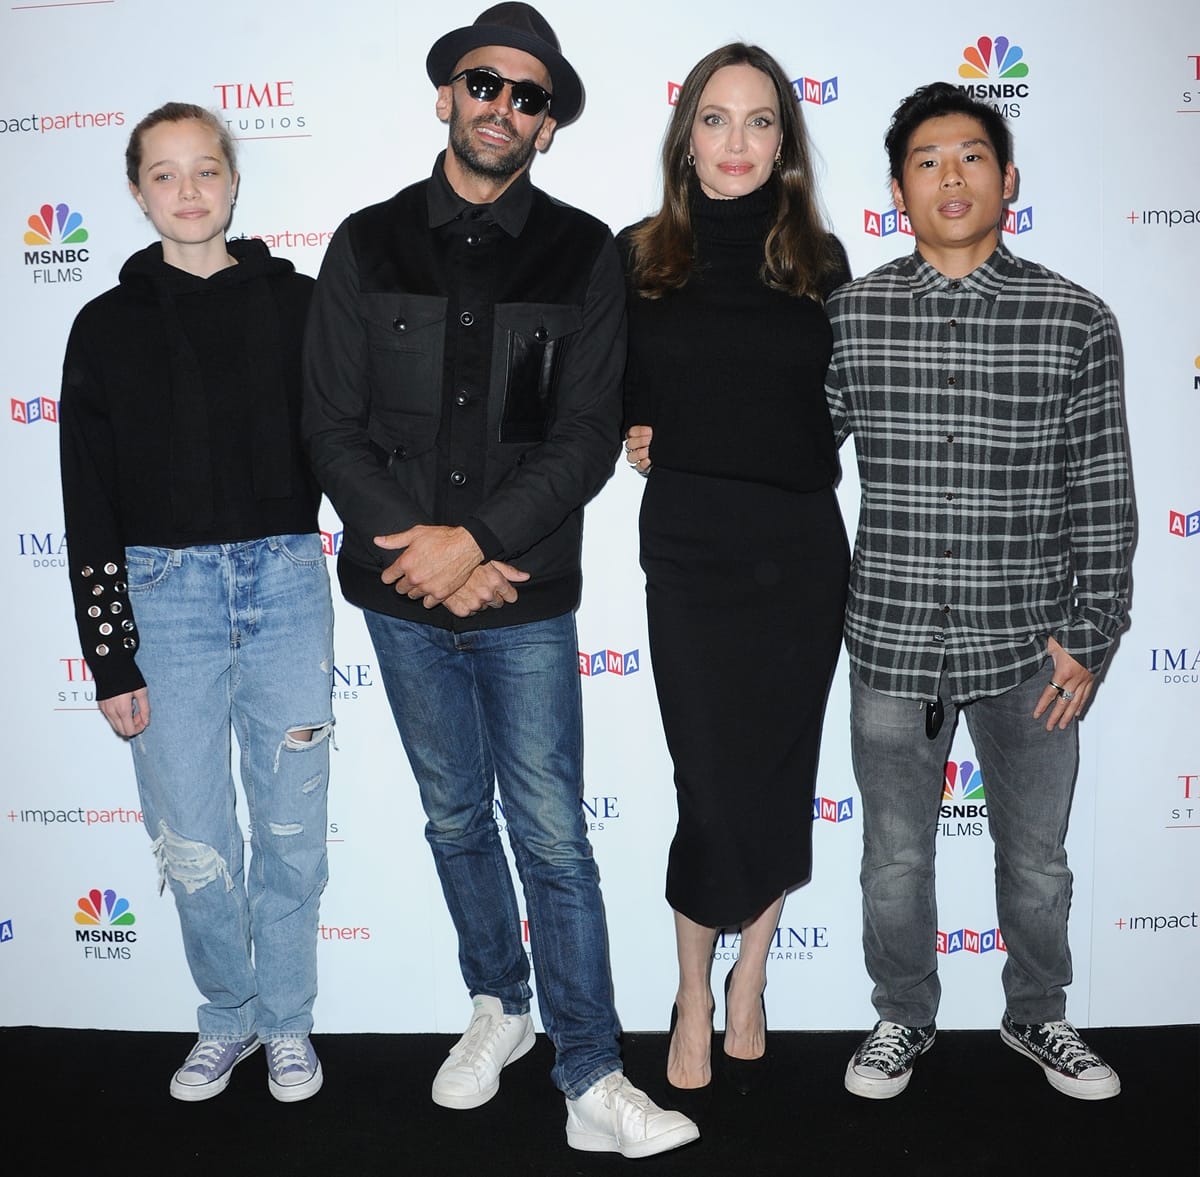 Shiloh Jolie-Pitt in ripped jeans with street artist JR, Angelina Jolie, and Pax Thien Jolie-Pitt at the Los Angeles premiere of MSNBC Films' "Paper & Glue: A JR Project"